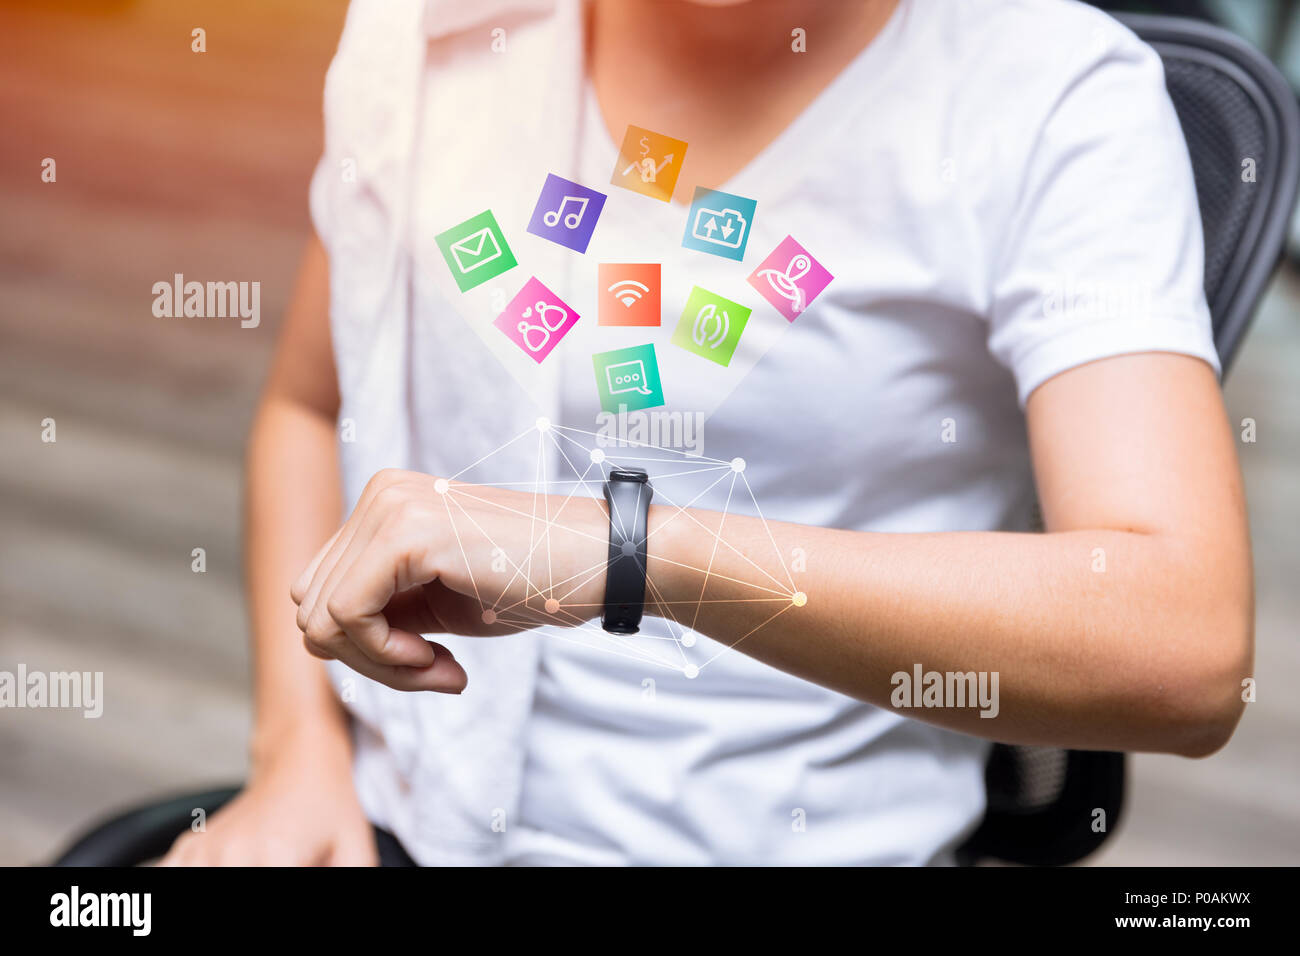 woman using Smartwatch in fitness with flat app icon illustration concept Stock Photo